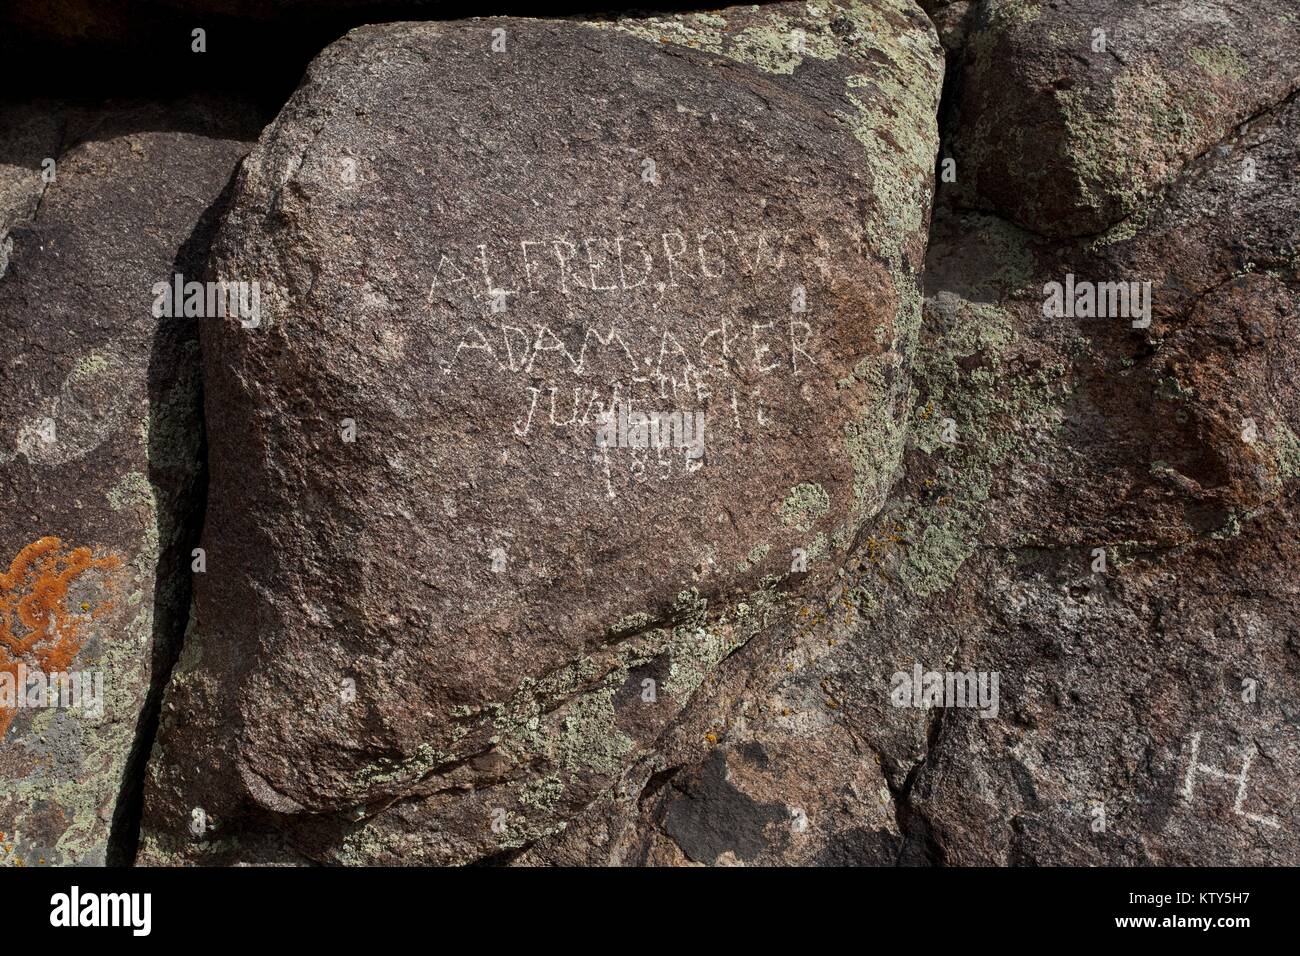 An emigrant pioneer signature is carved into a rock along the Oregon National Historic Trail September 14, 2010 in Oregon. Stock Photo